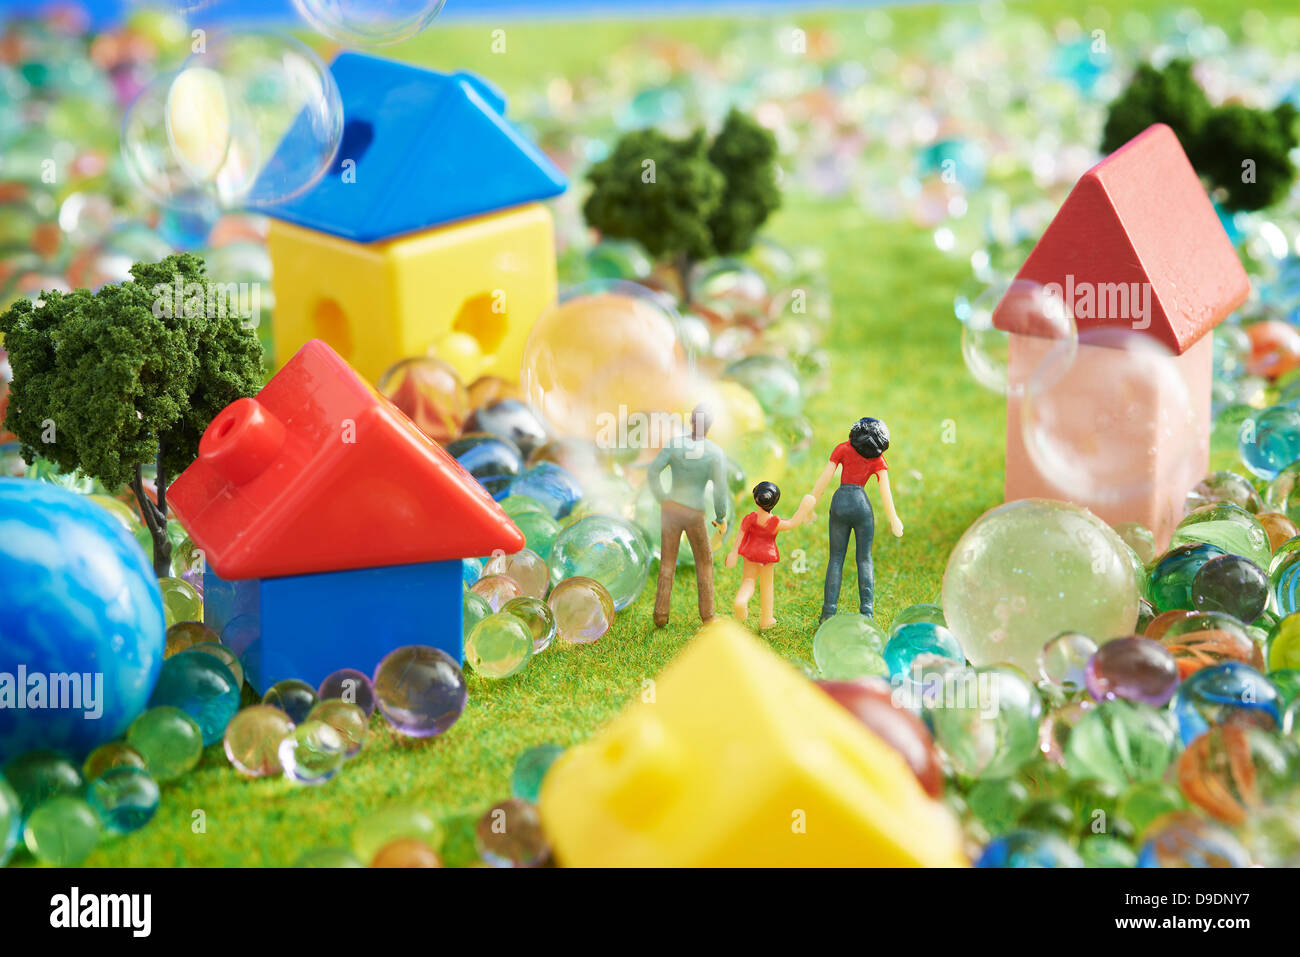 Figurines and houses made from plastic blocks with marbles Stock Photo